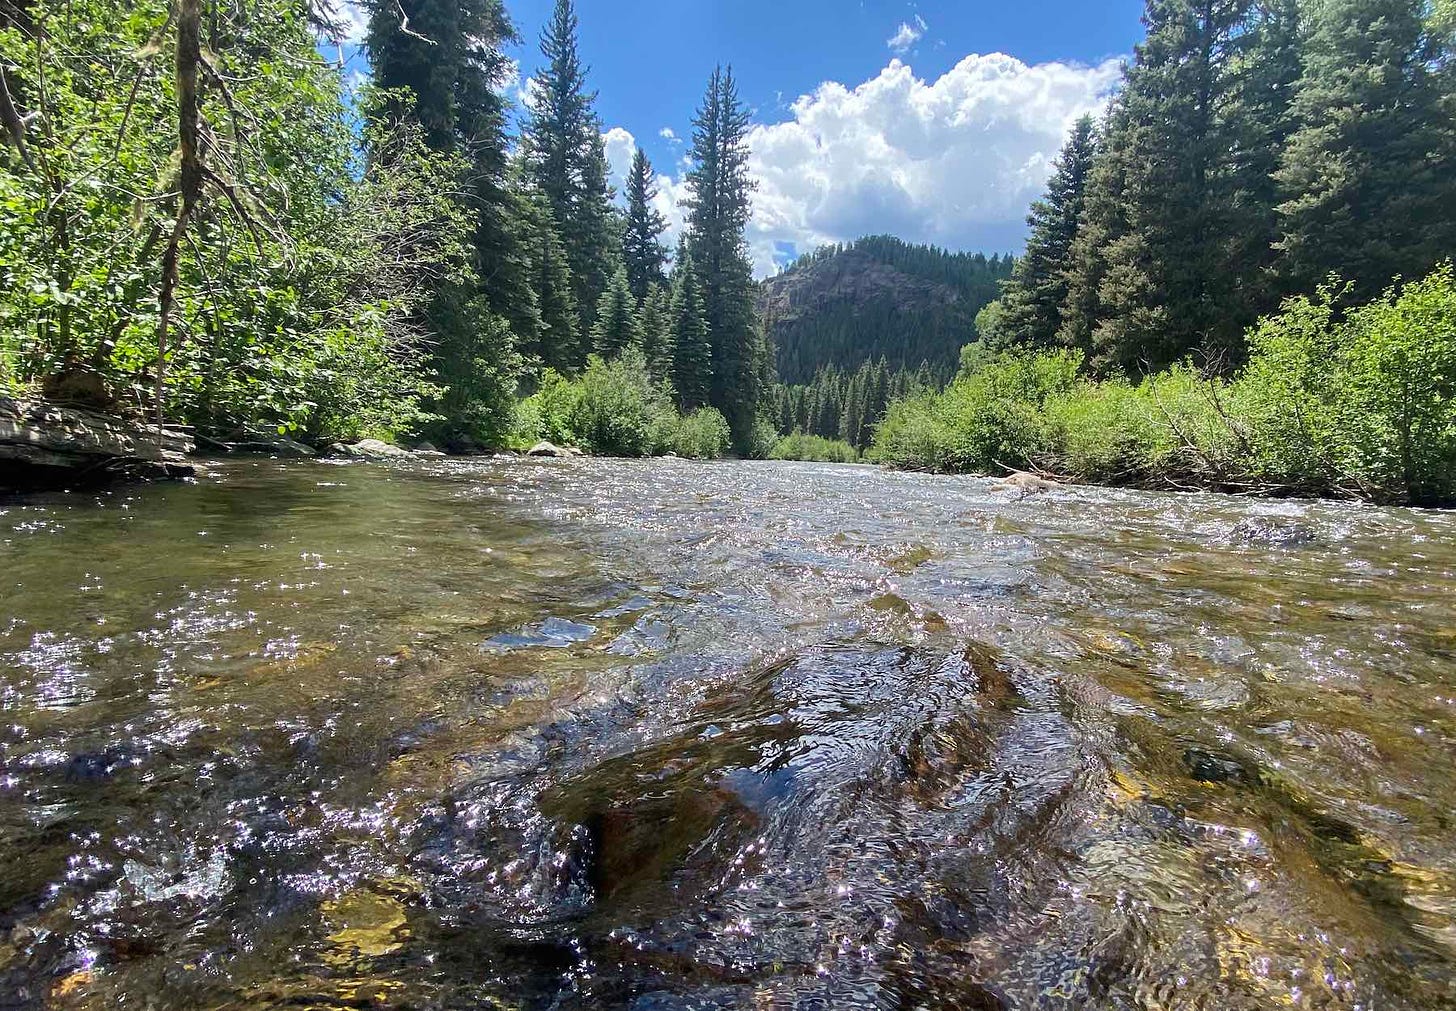 A river level view of the East Fork of the San Juan River in southwest Colorado. There are pine trees along the river banks and a few puffy clouds in the sky.